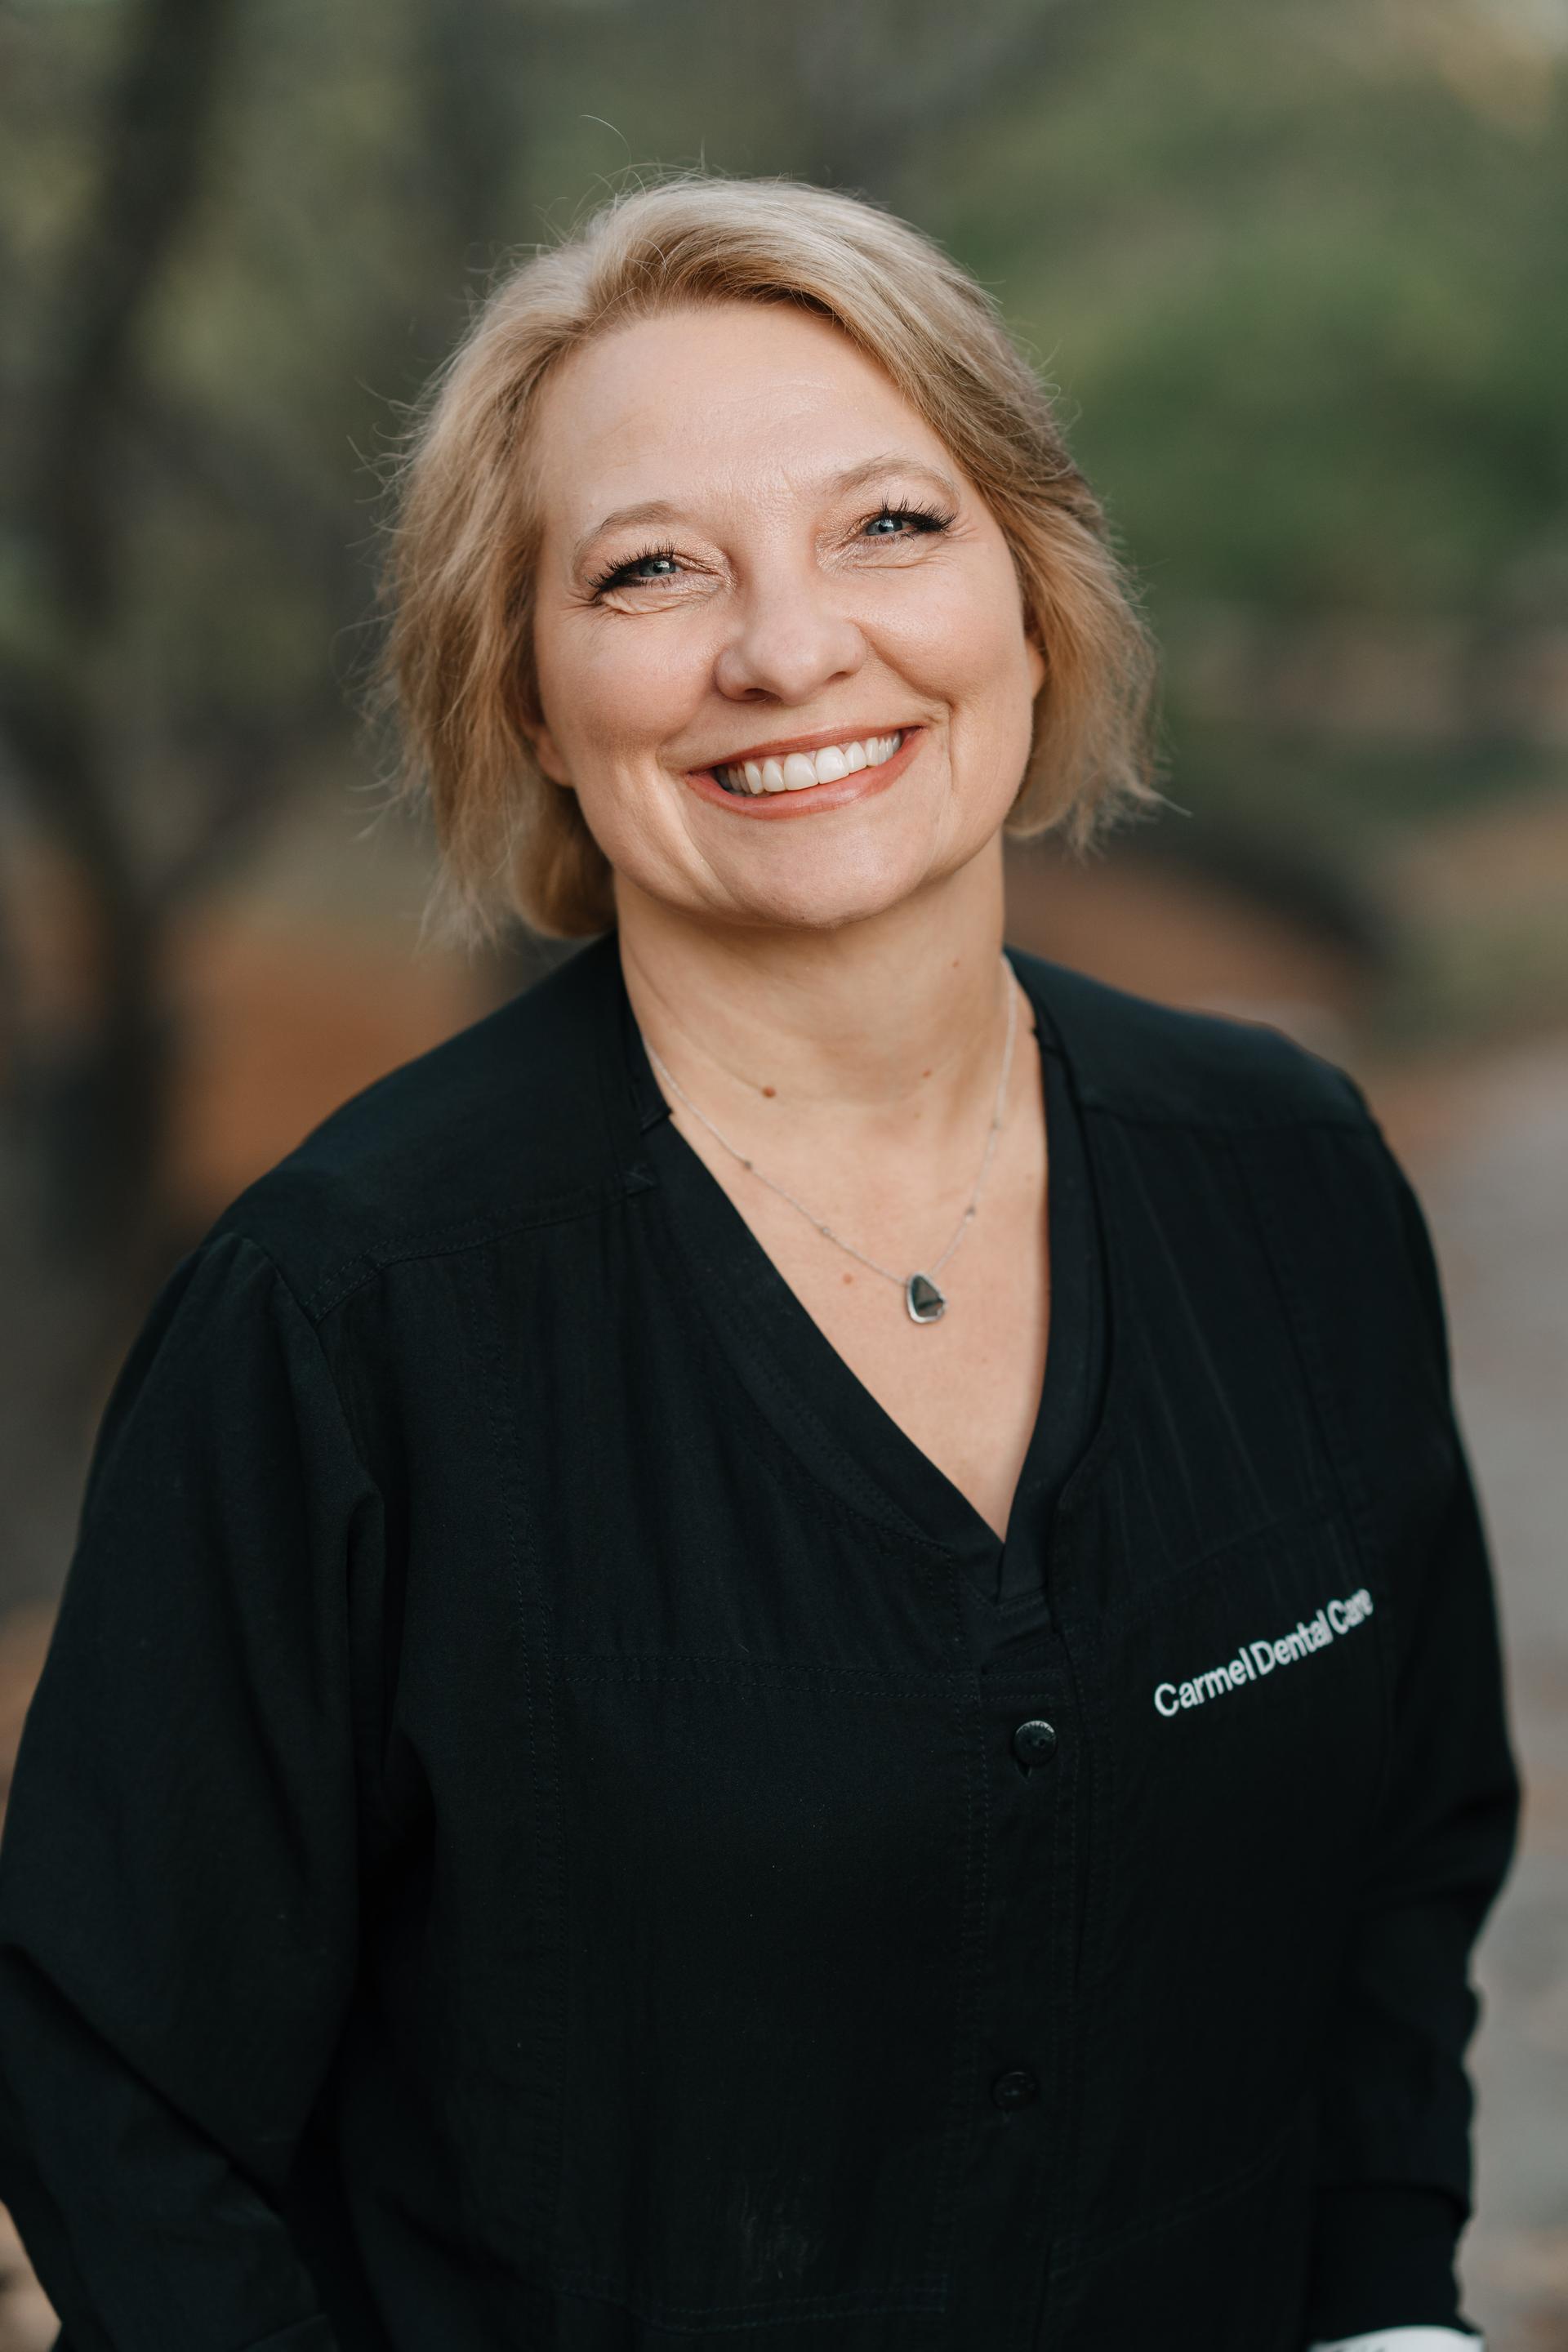 Professional and friendly staff member at Carmel Dental Care, ready to assist patients with their dental needs and provide exceptional care.